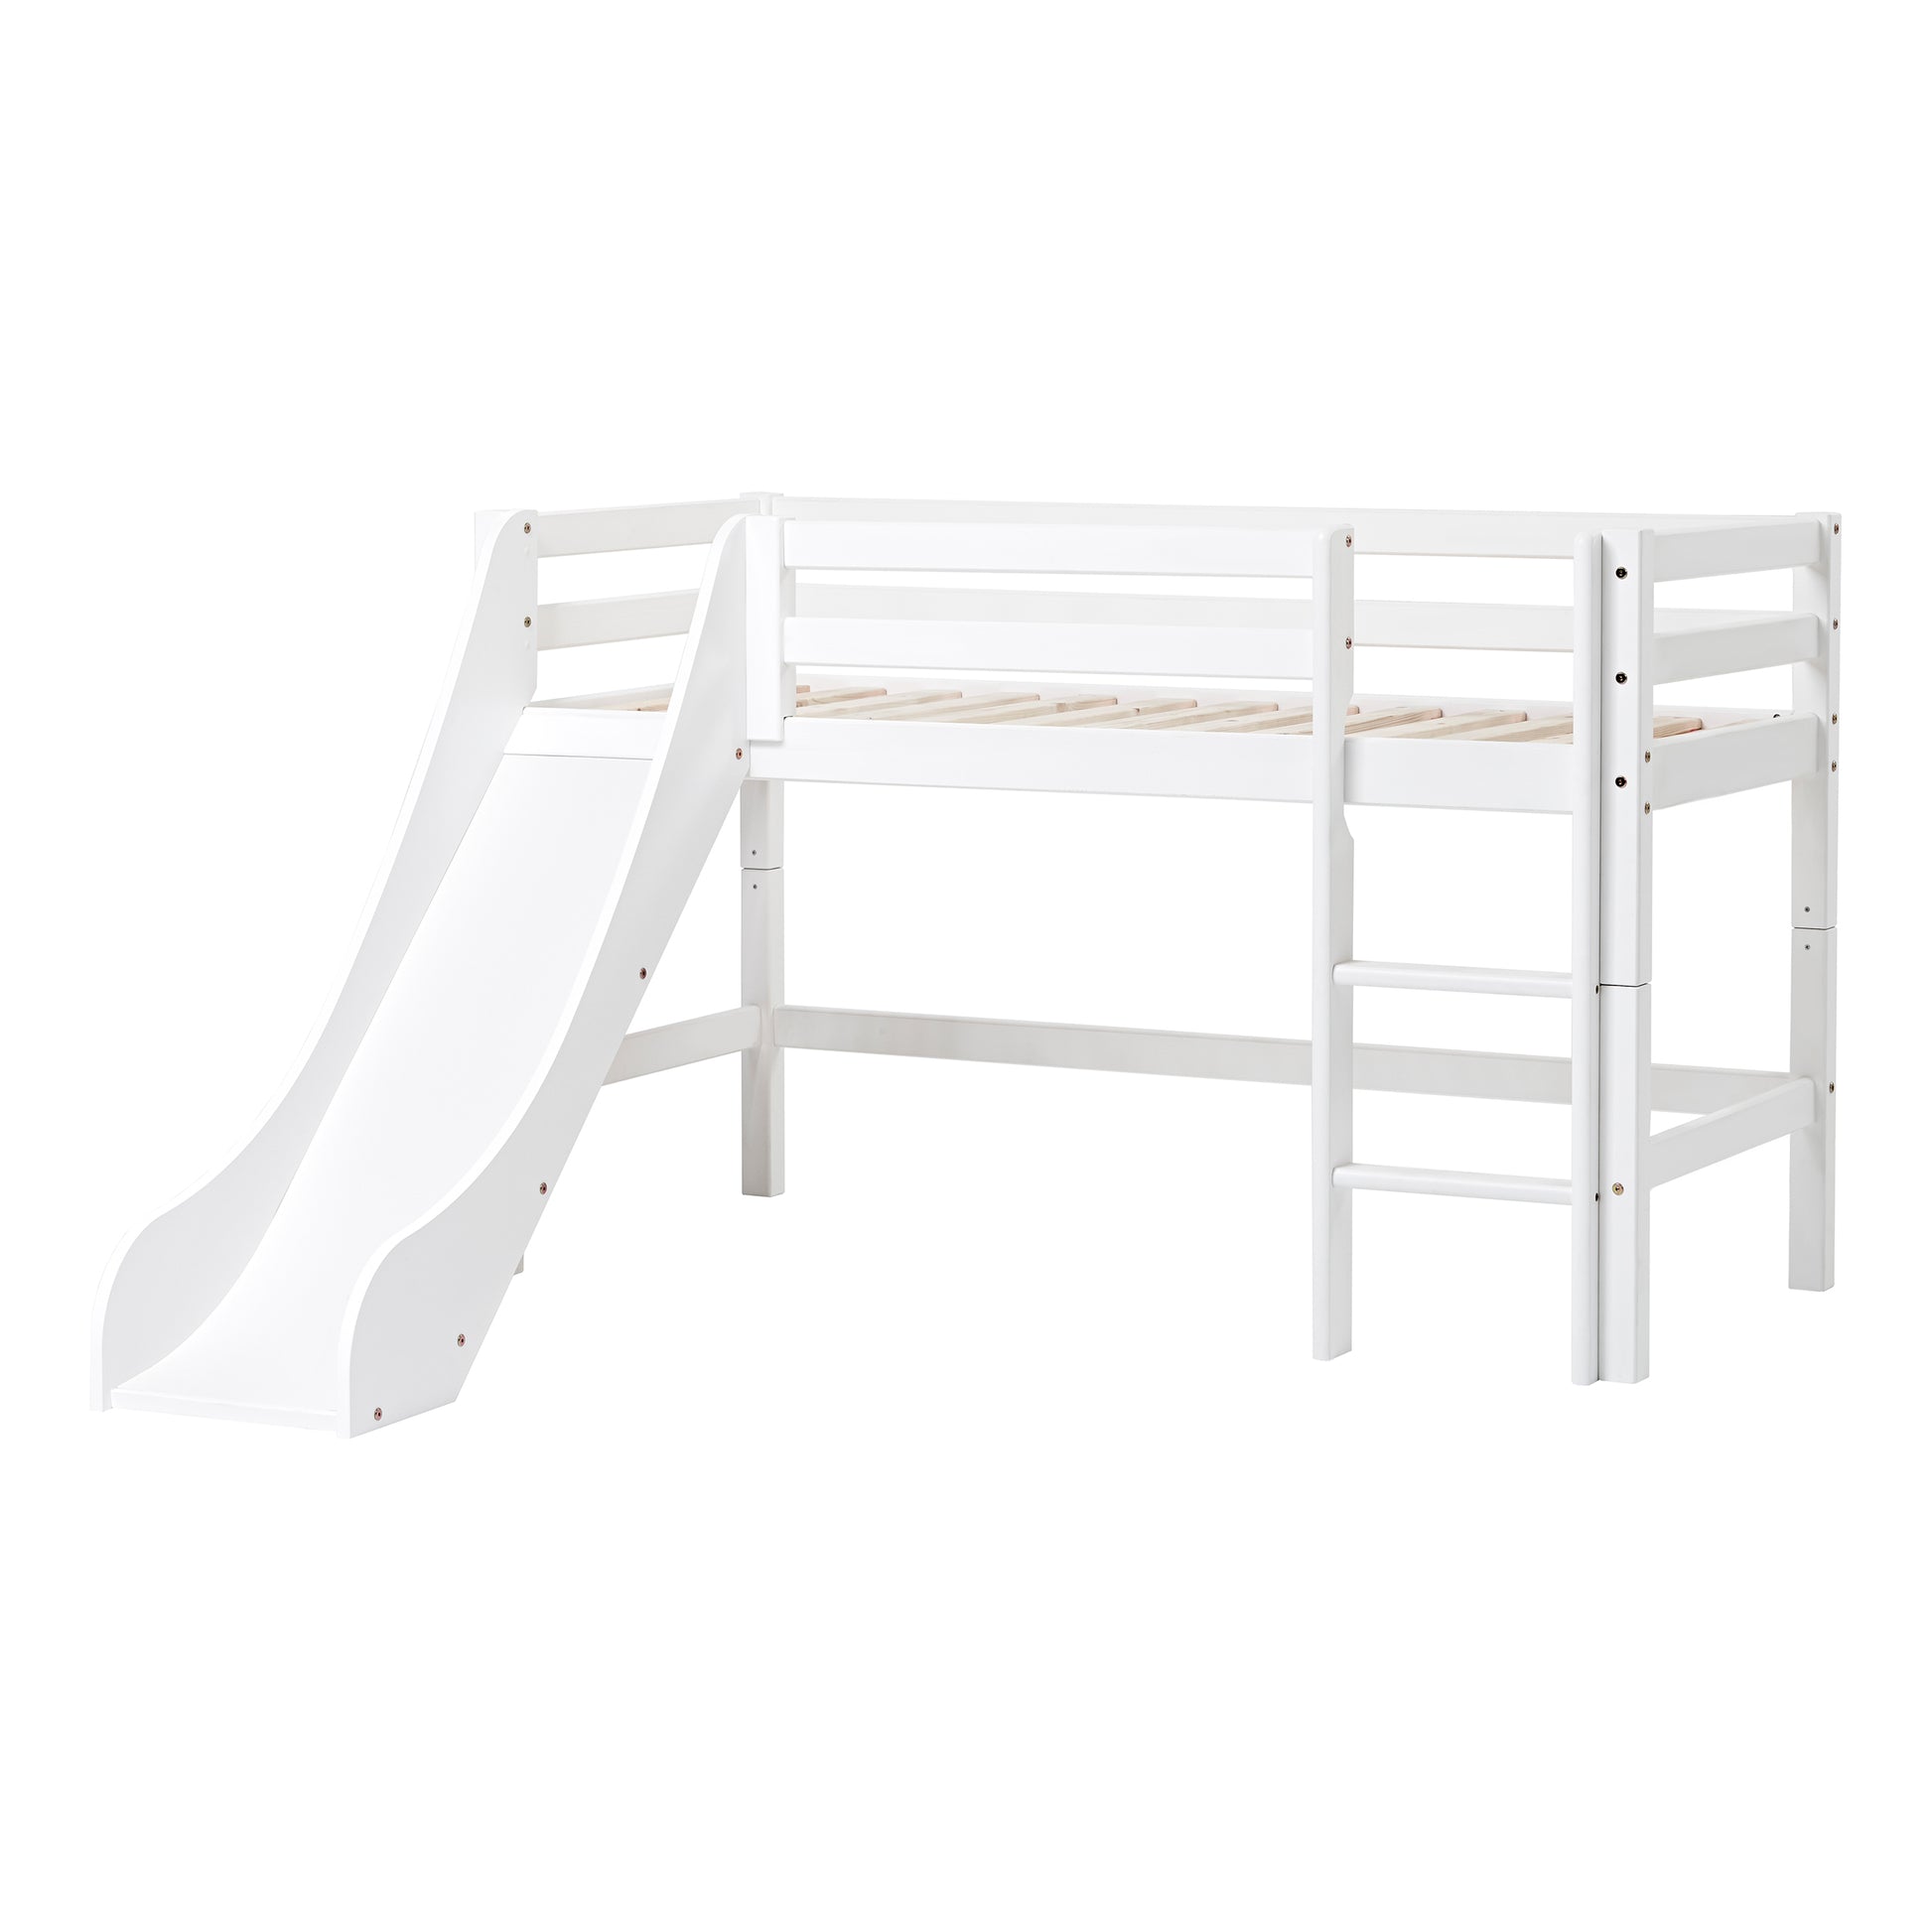 Hoppekids Eco Dream Mid Sleeper Bed with Slide - White (2 Sizes Available)